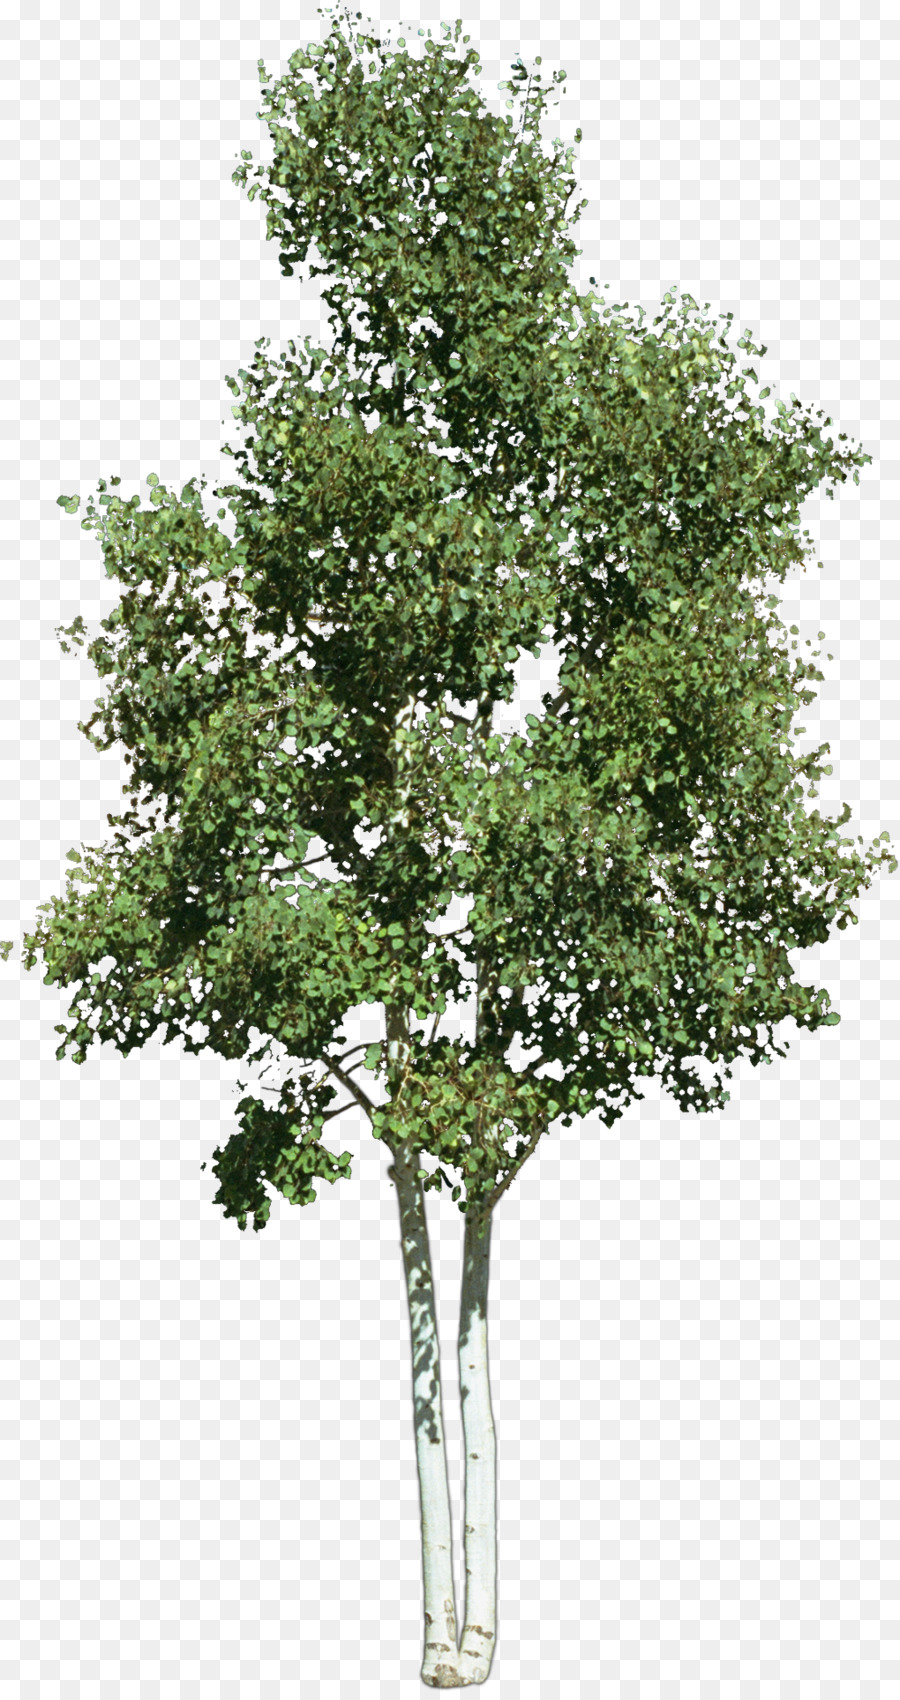 Tree - Trees Trees transparent transparent material png download - 530* ...